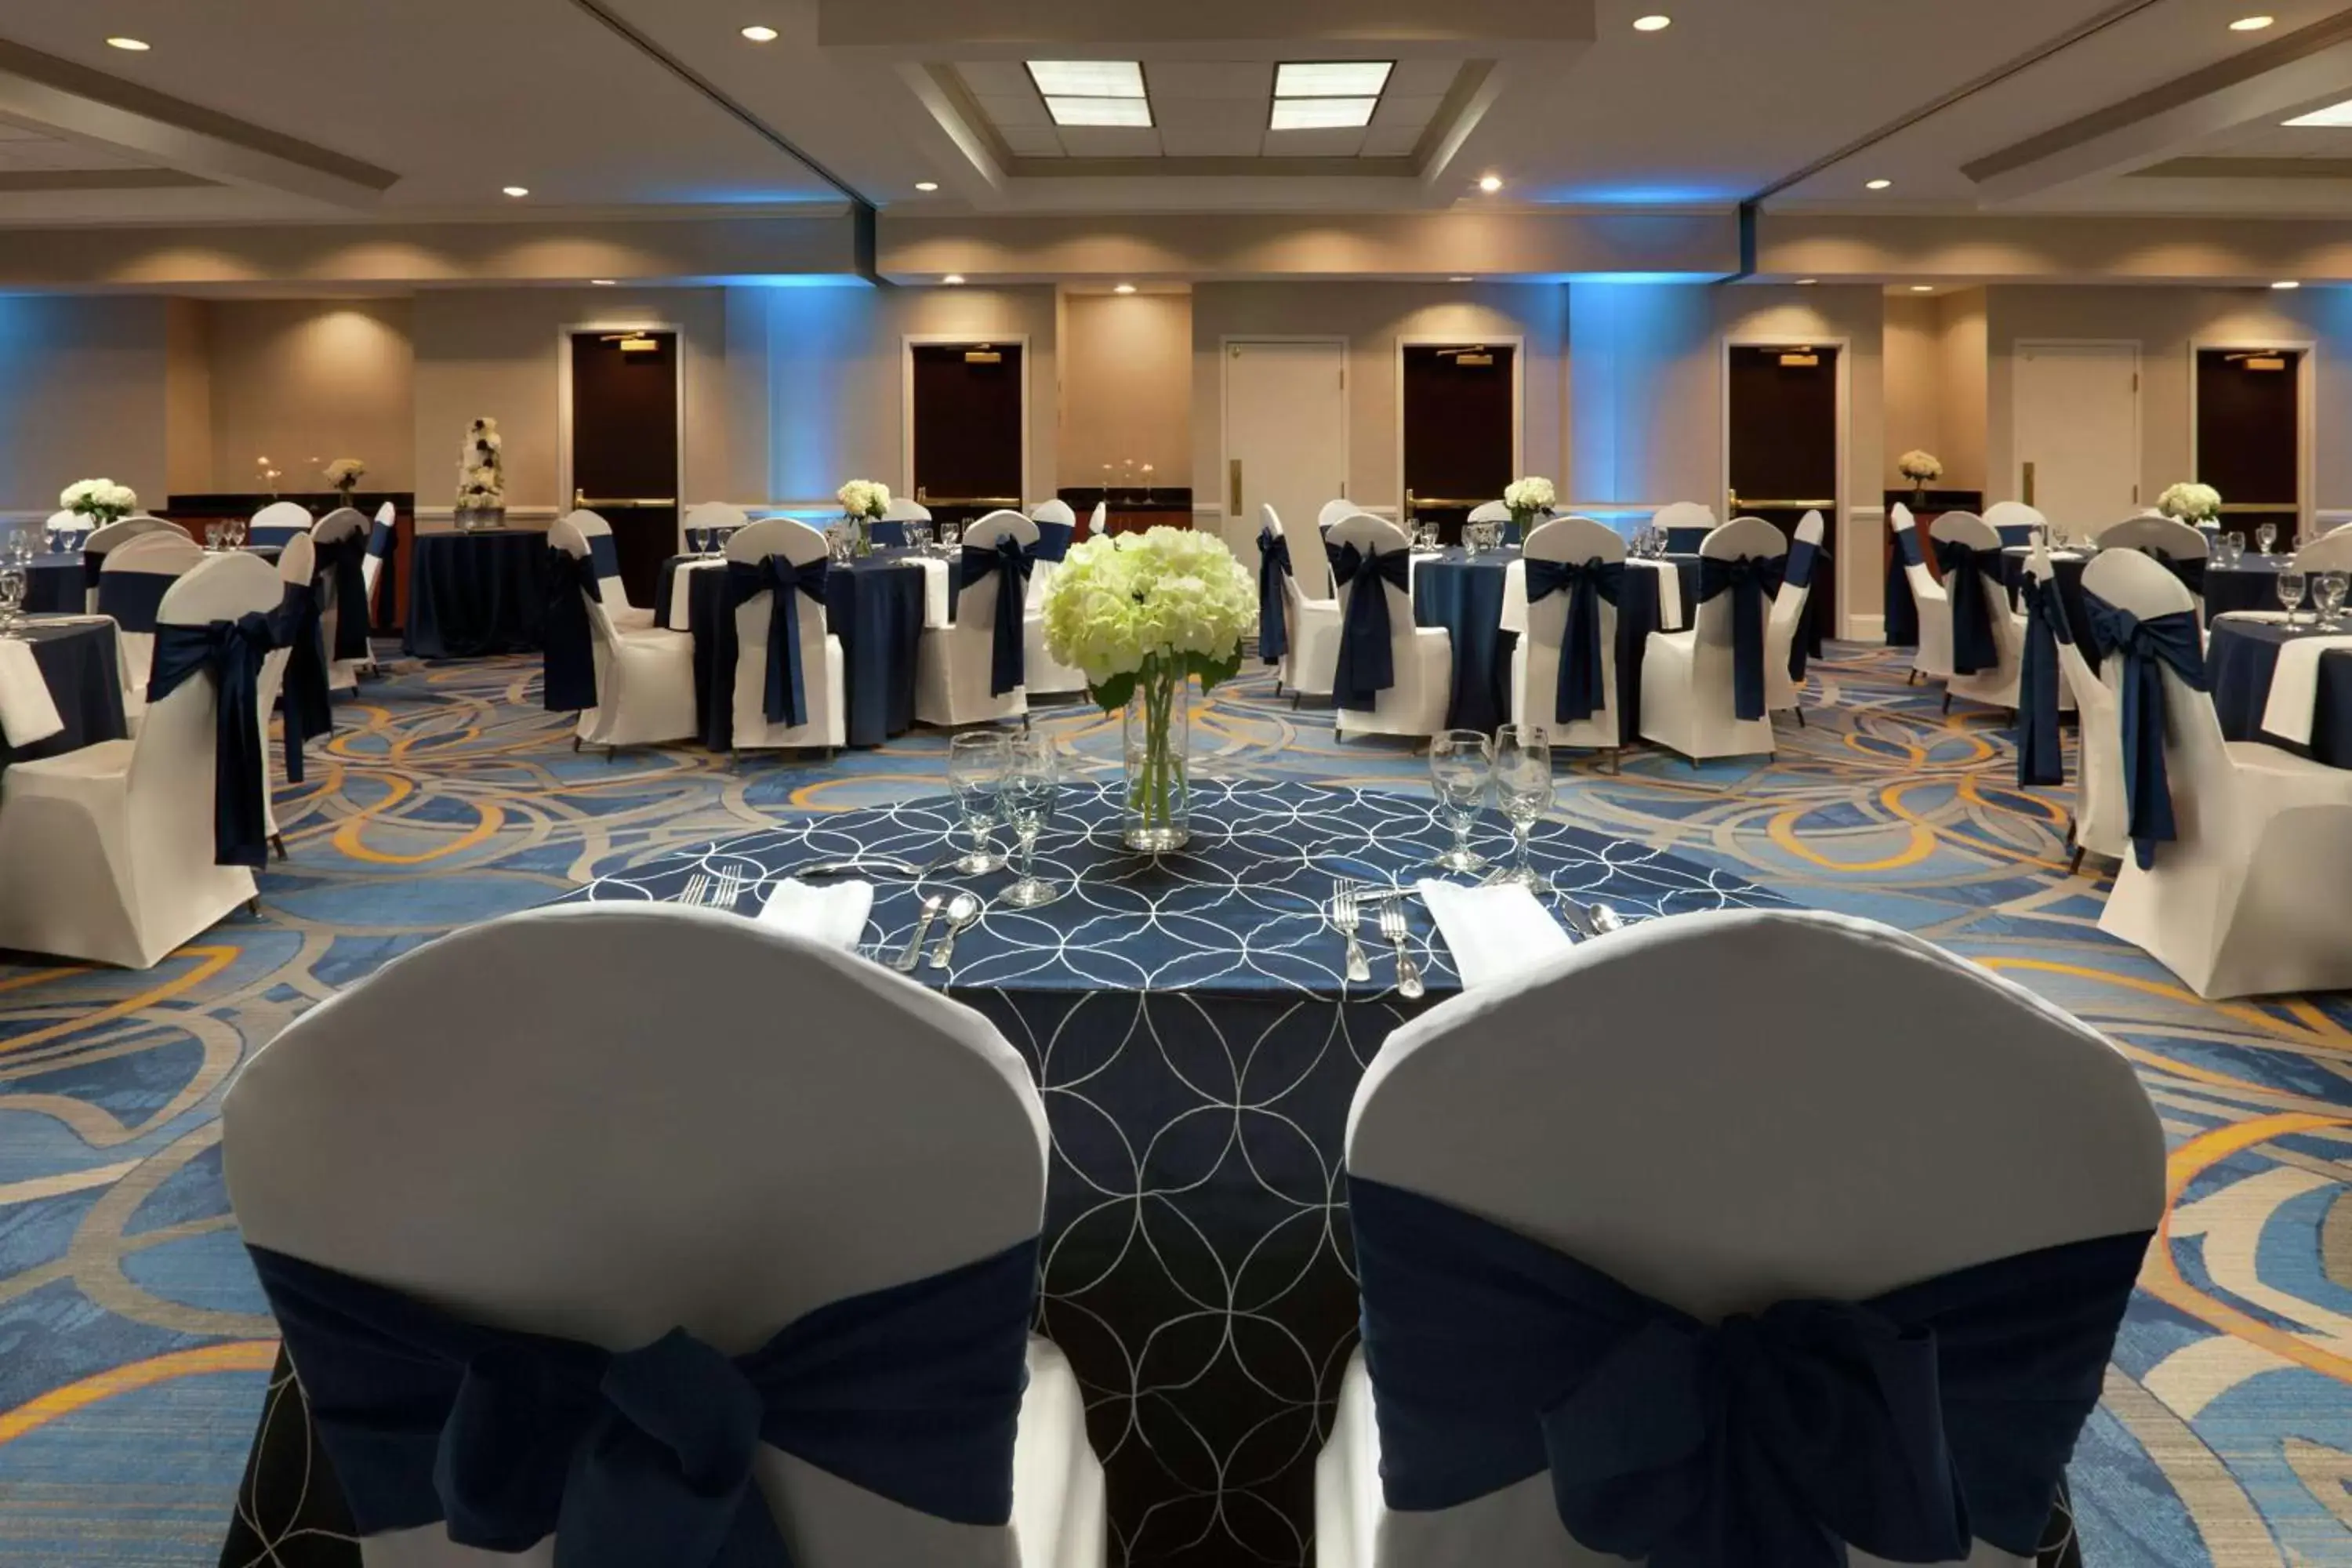 Meeting/conference room, Banquet Facilities in DoubleTree by Hilton Hotel Annapolis